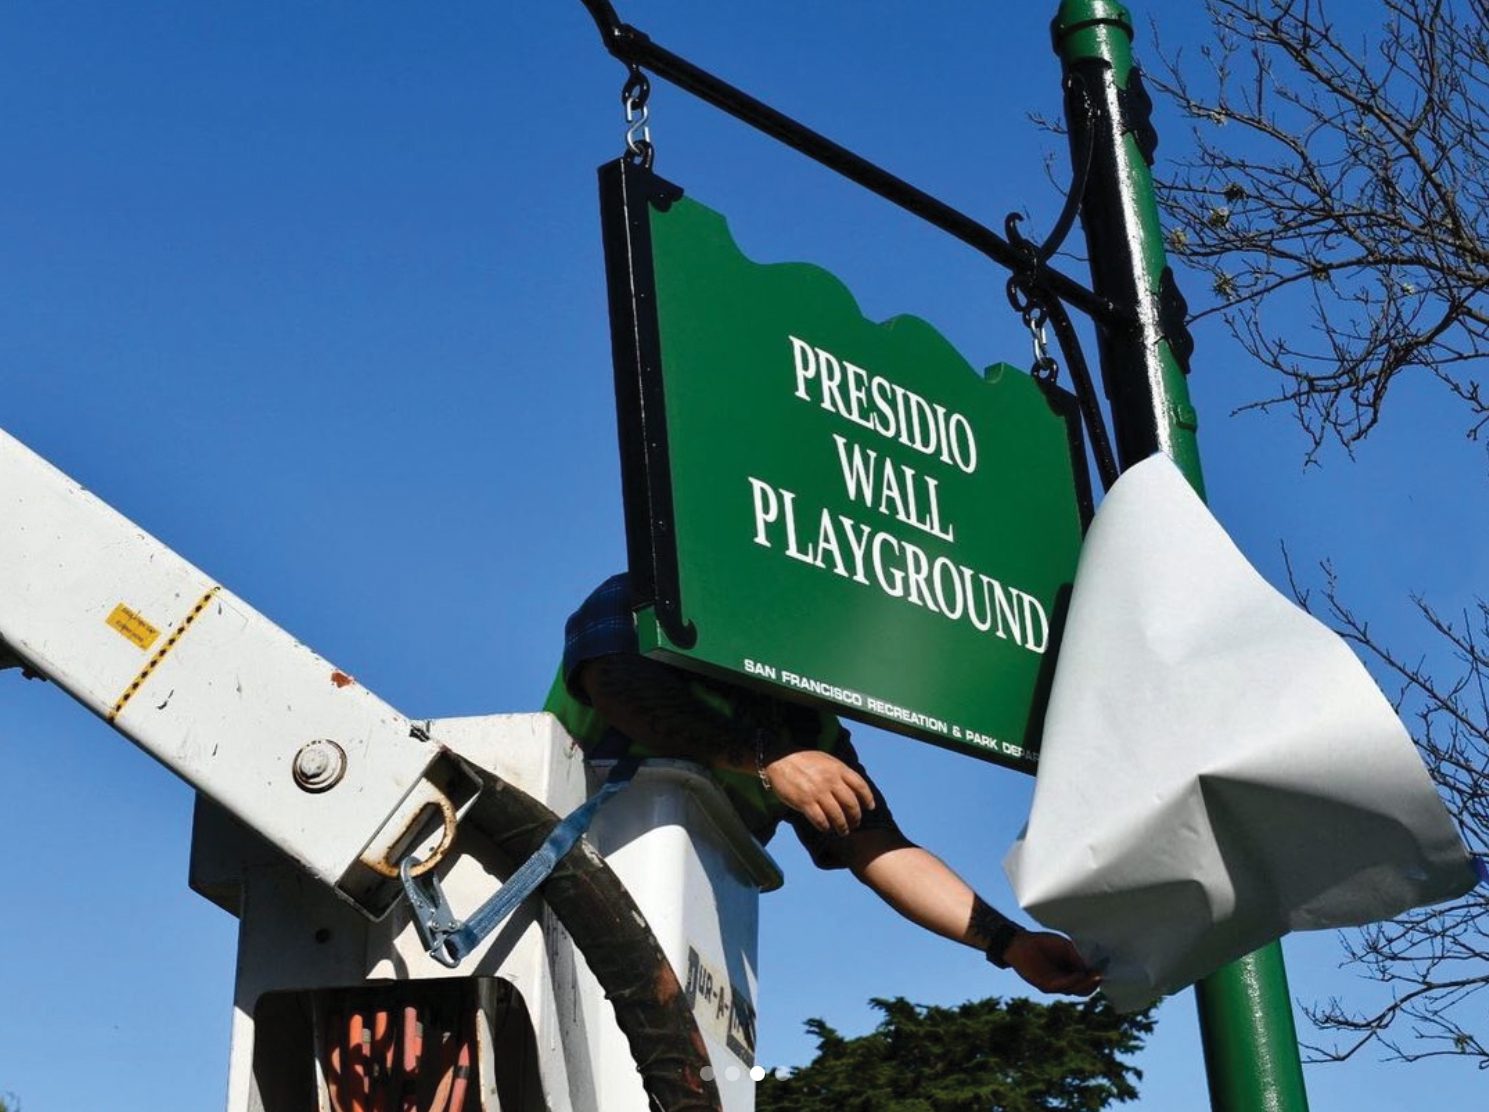 Workers unveil the new sign for Presidio Wall Playground, formerly Julius Kahn Playground.